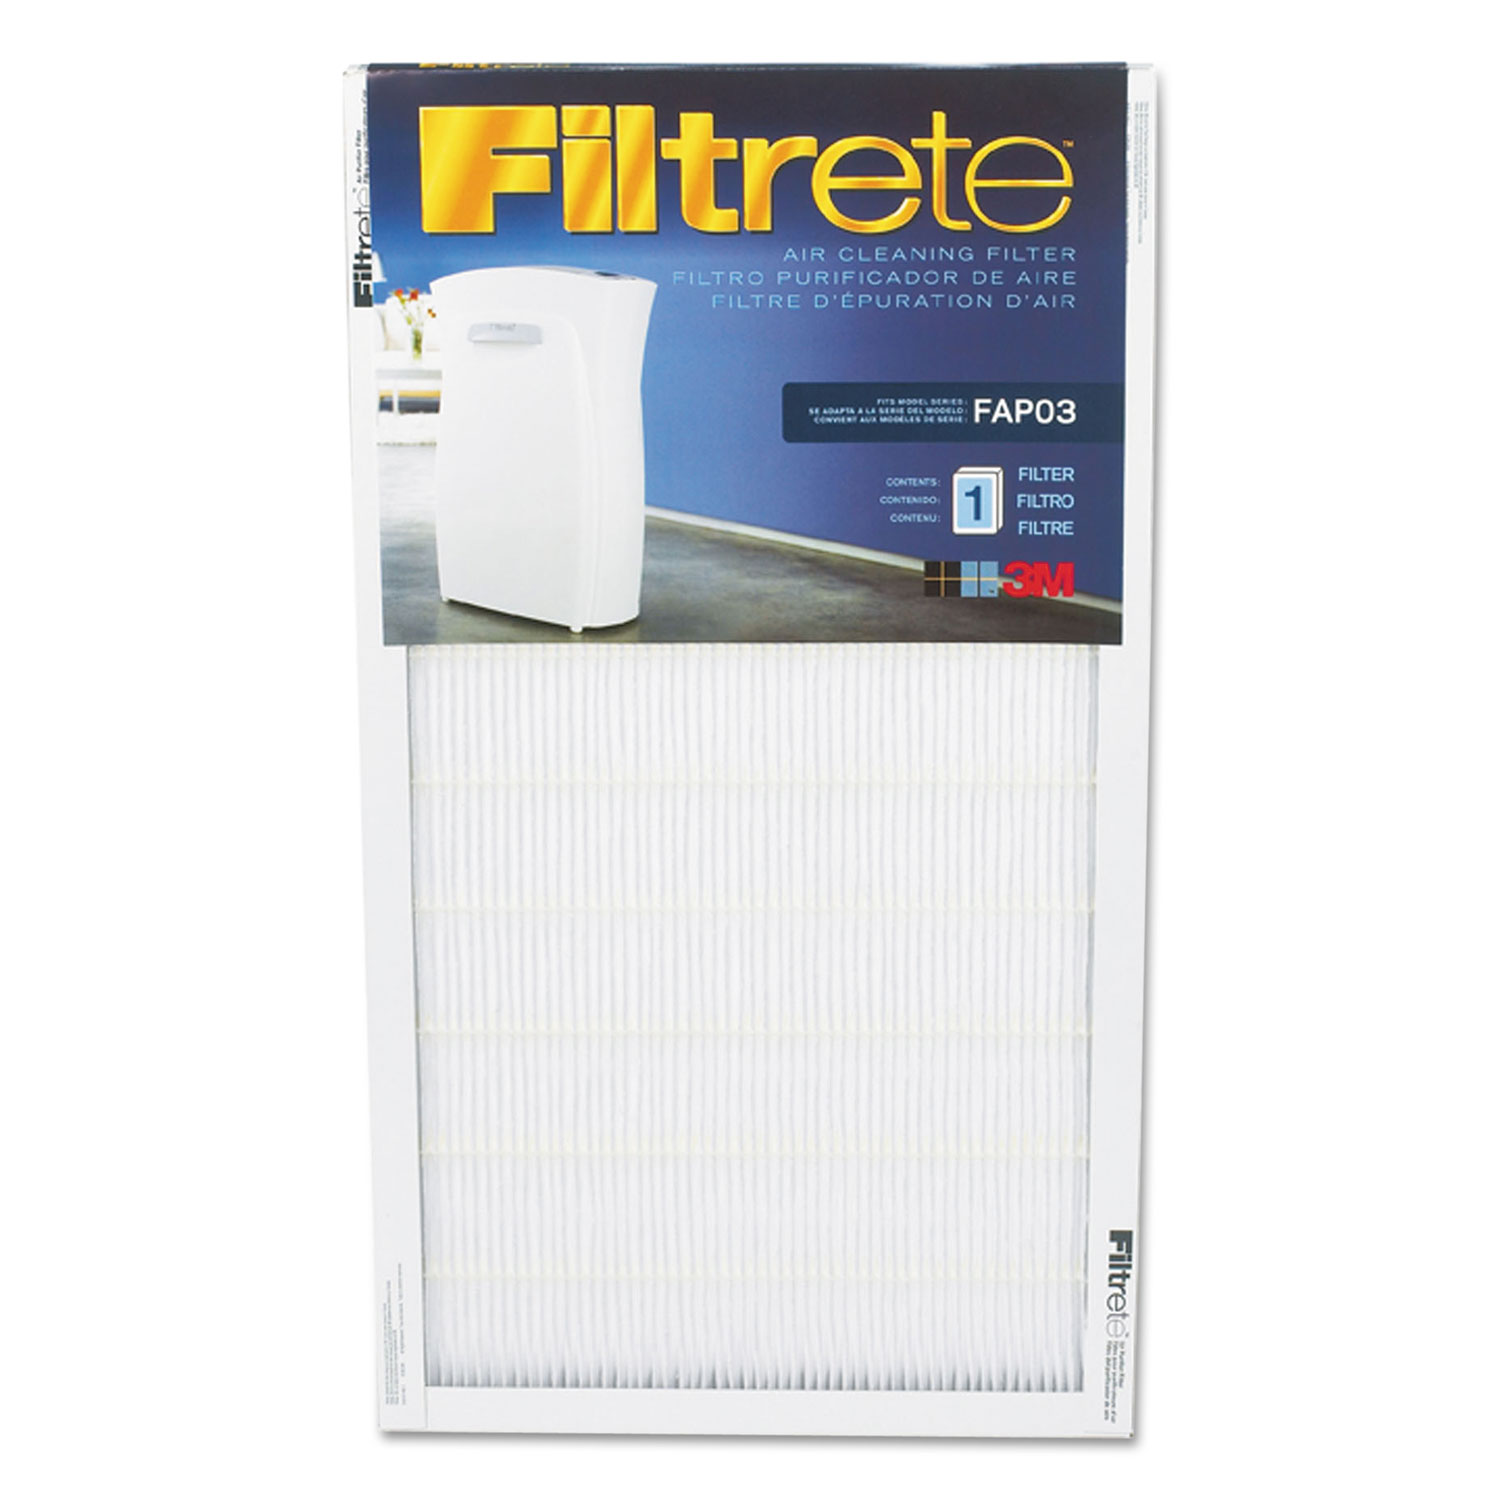 Air Cleaning Filter, 11 3/4